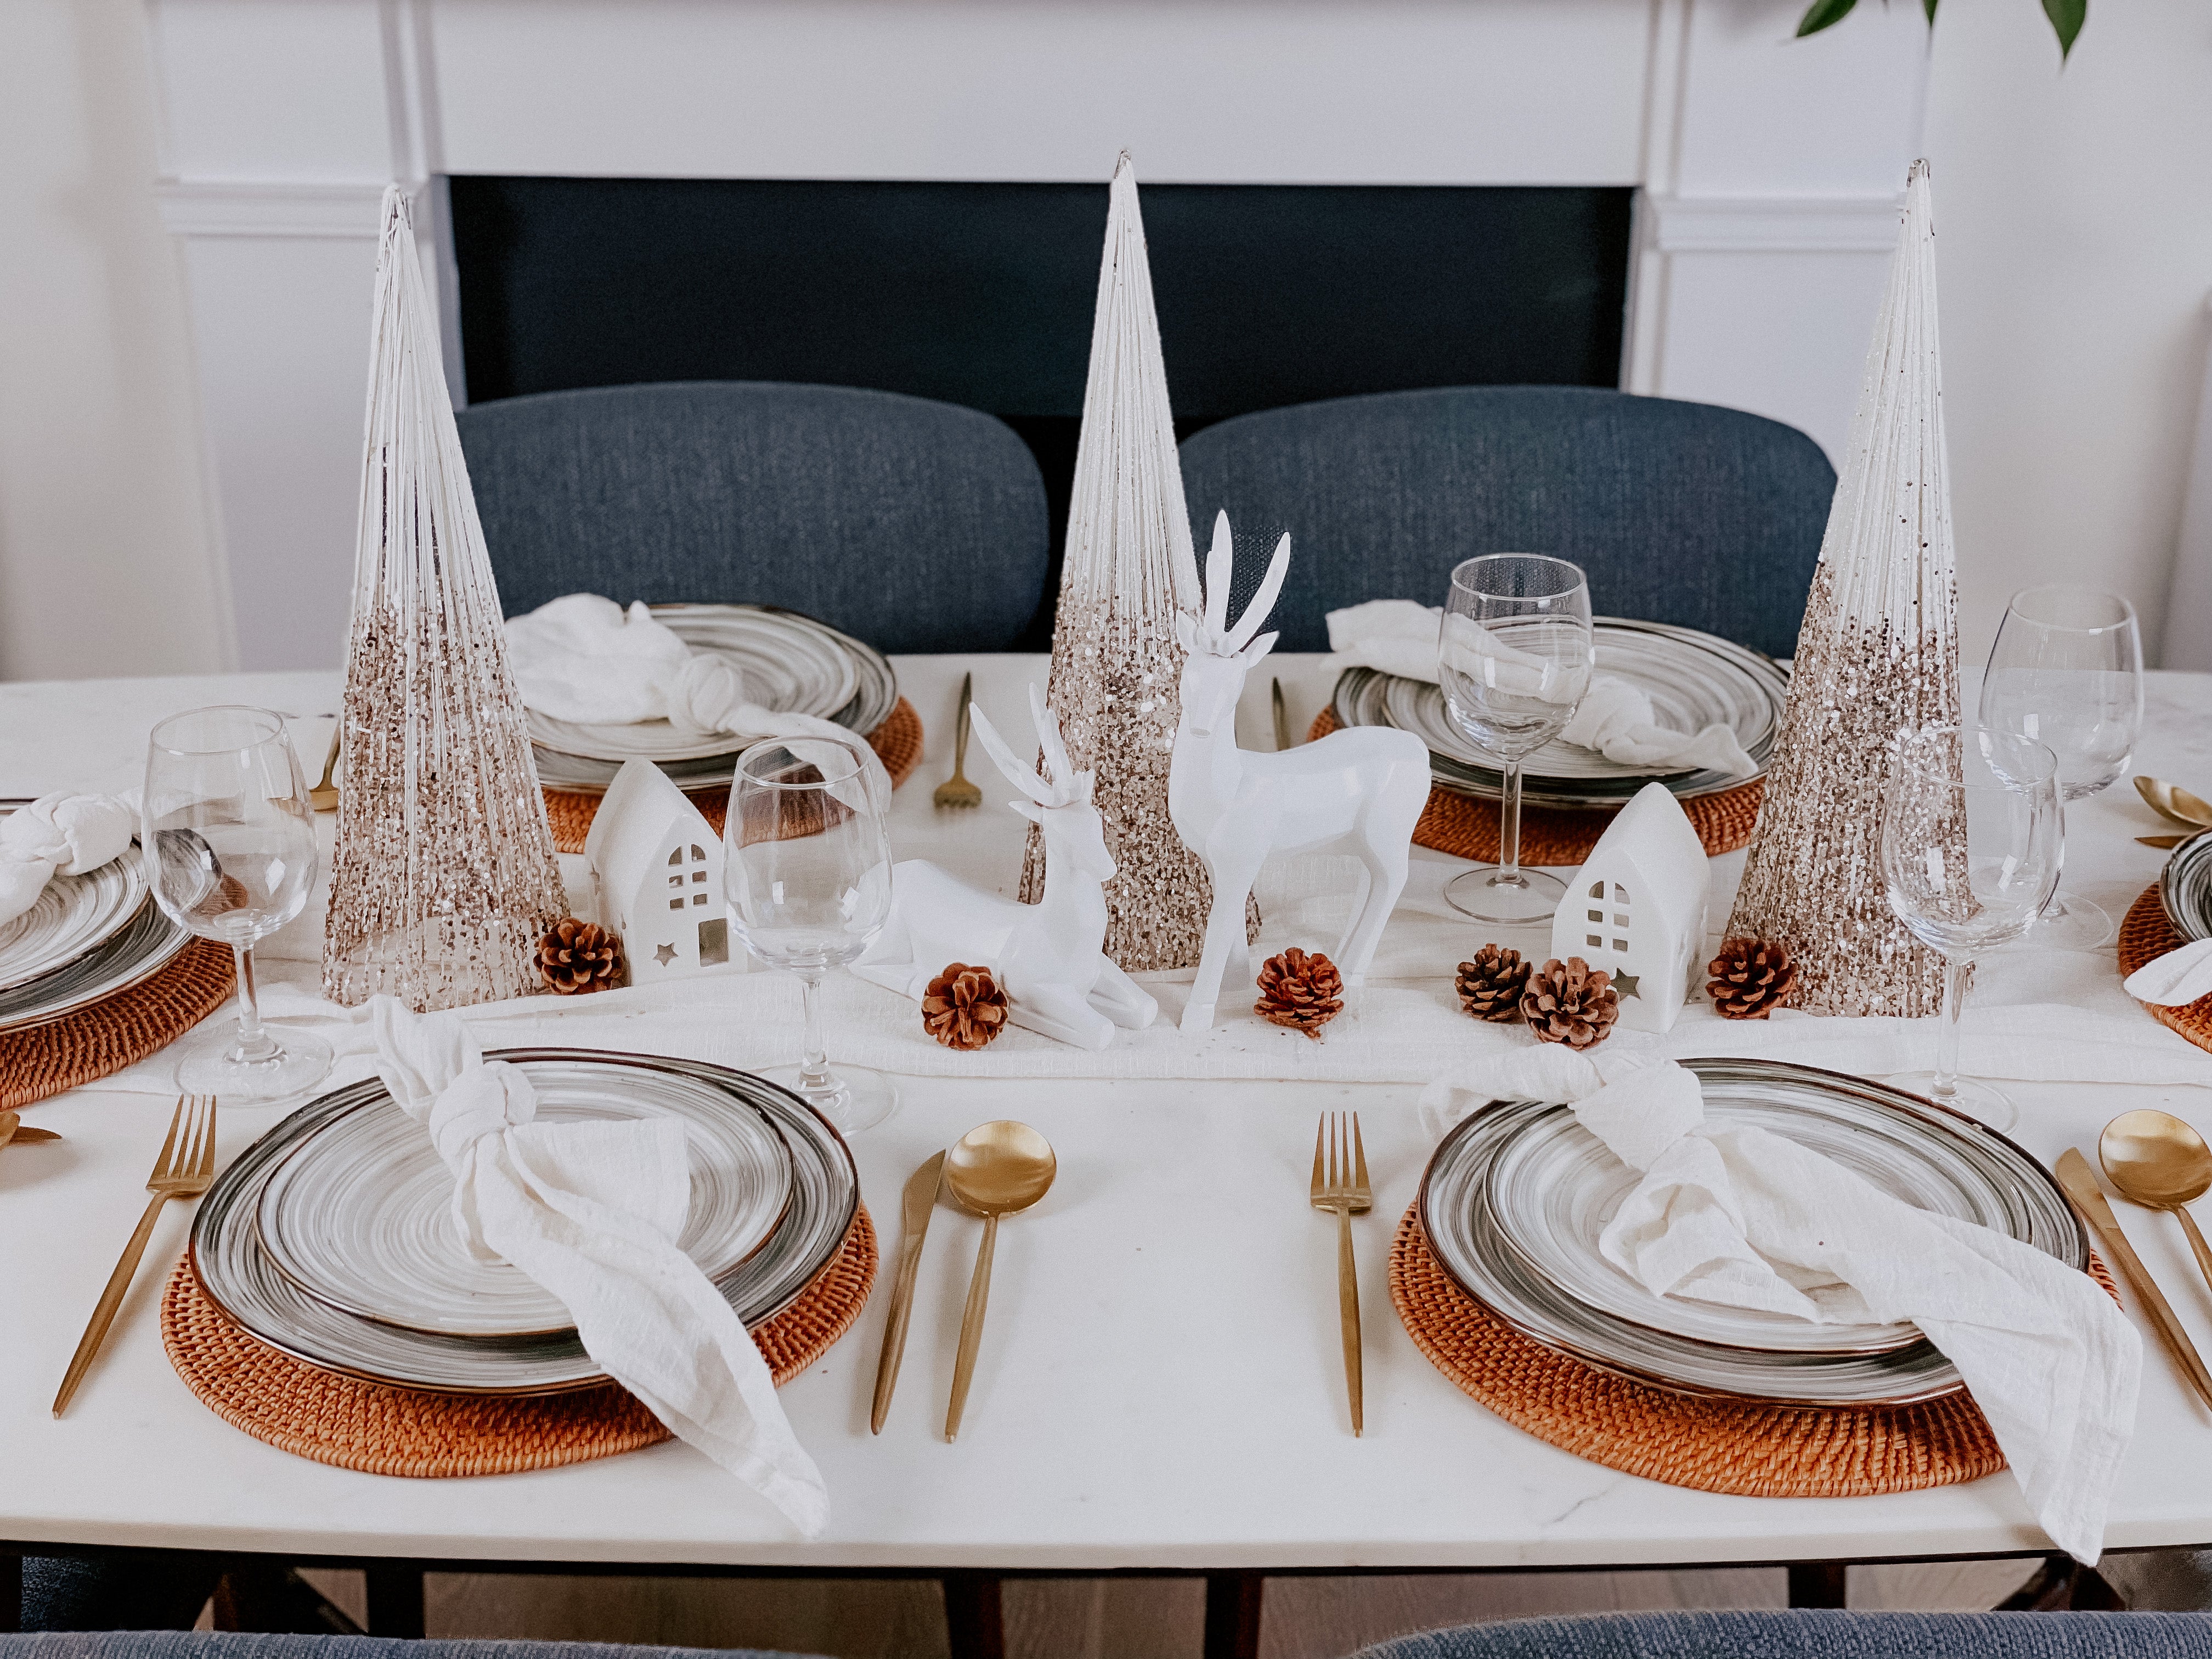 What a Host Home Decor: Christmas Tablescape With Geometric Decorative Christmas Deers, Scandi Houses, Rattan Placemats, White and Gold Christmas Table Pine Trees, Porcelain Plates Set Tableware, Gold Cutlery Stainless Steel Set and Rustic Cotton Gauze Table Textiles